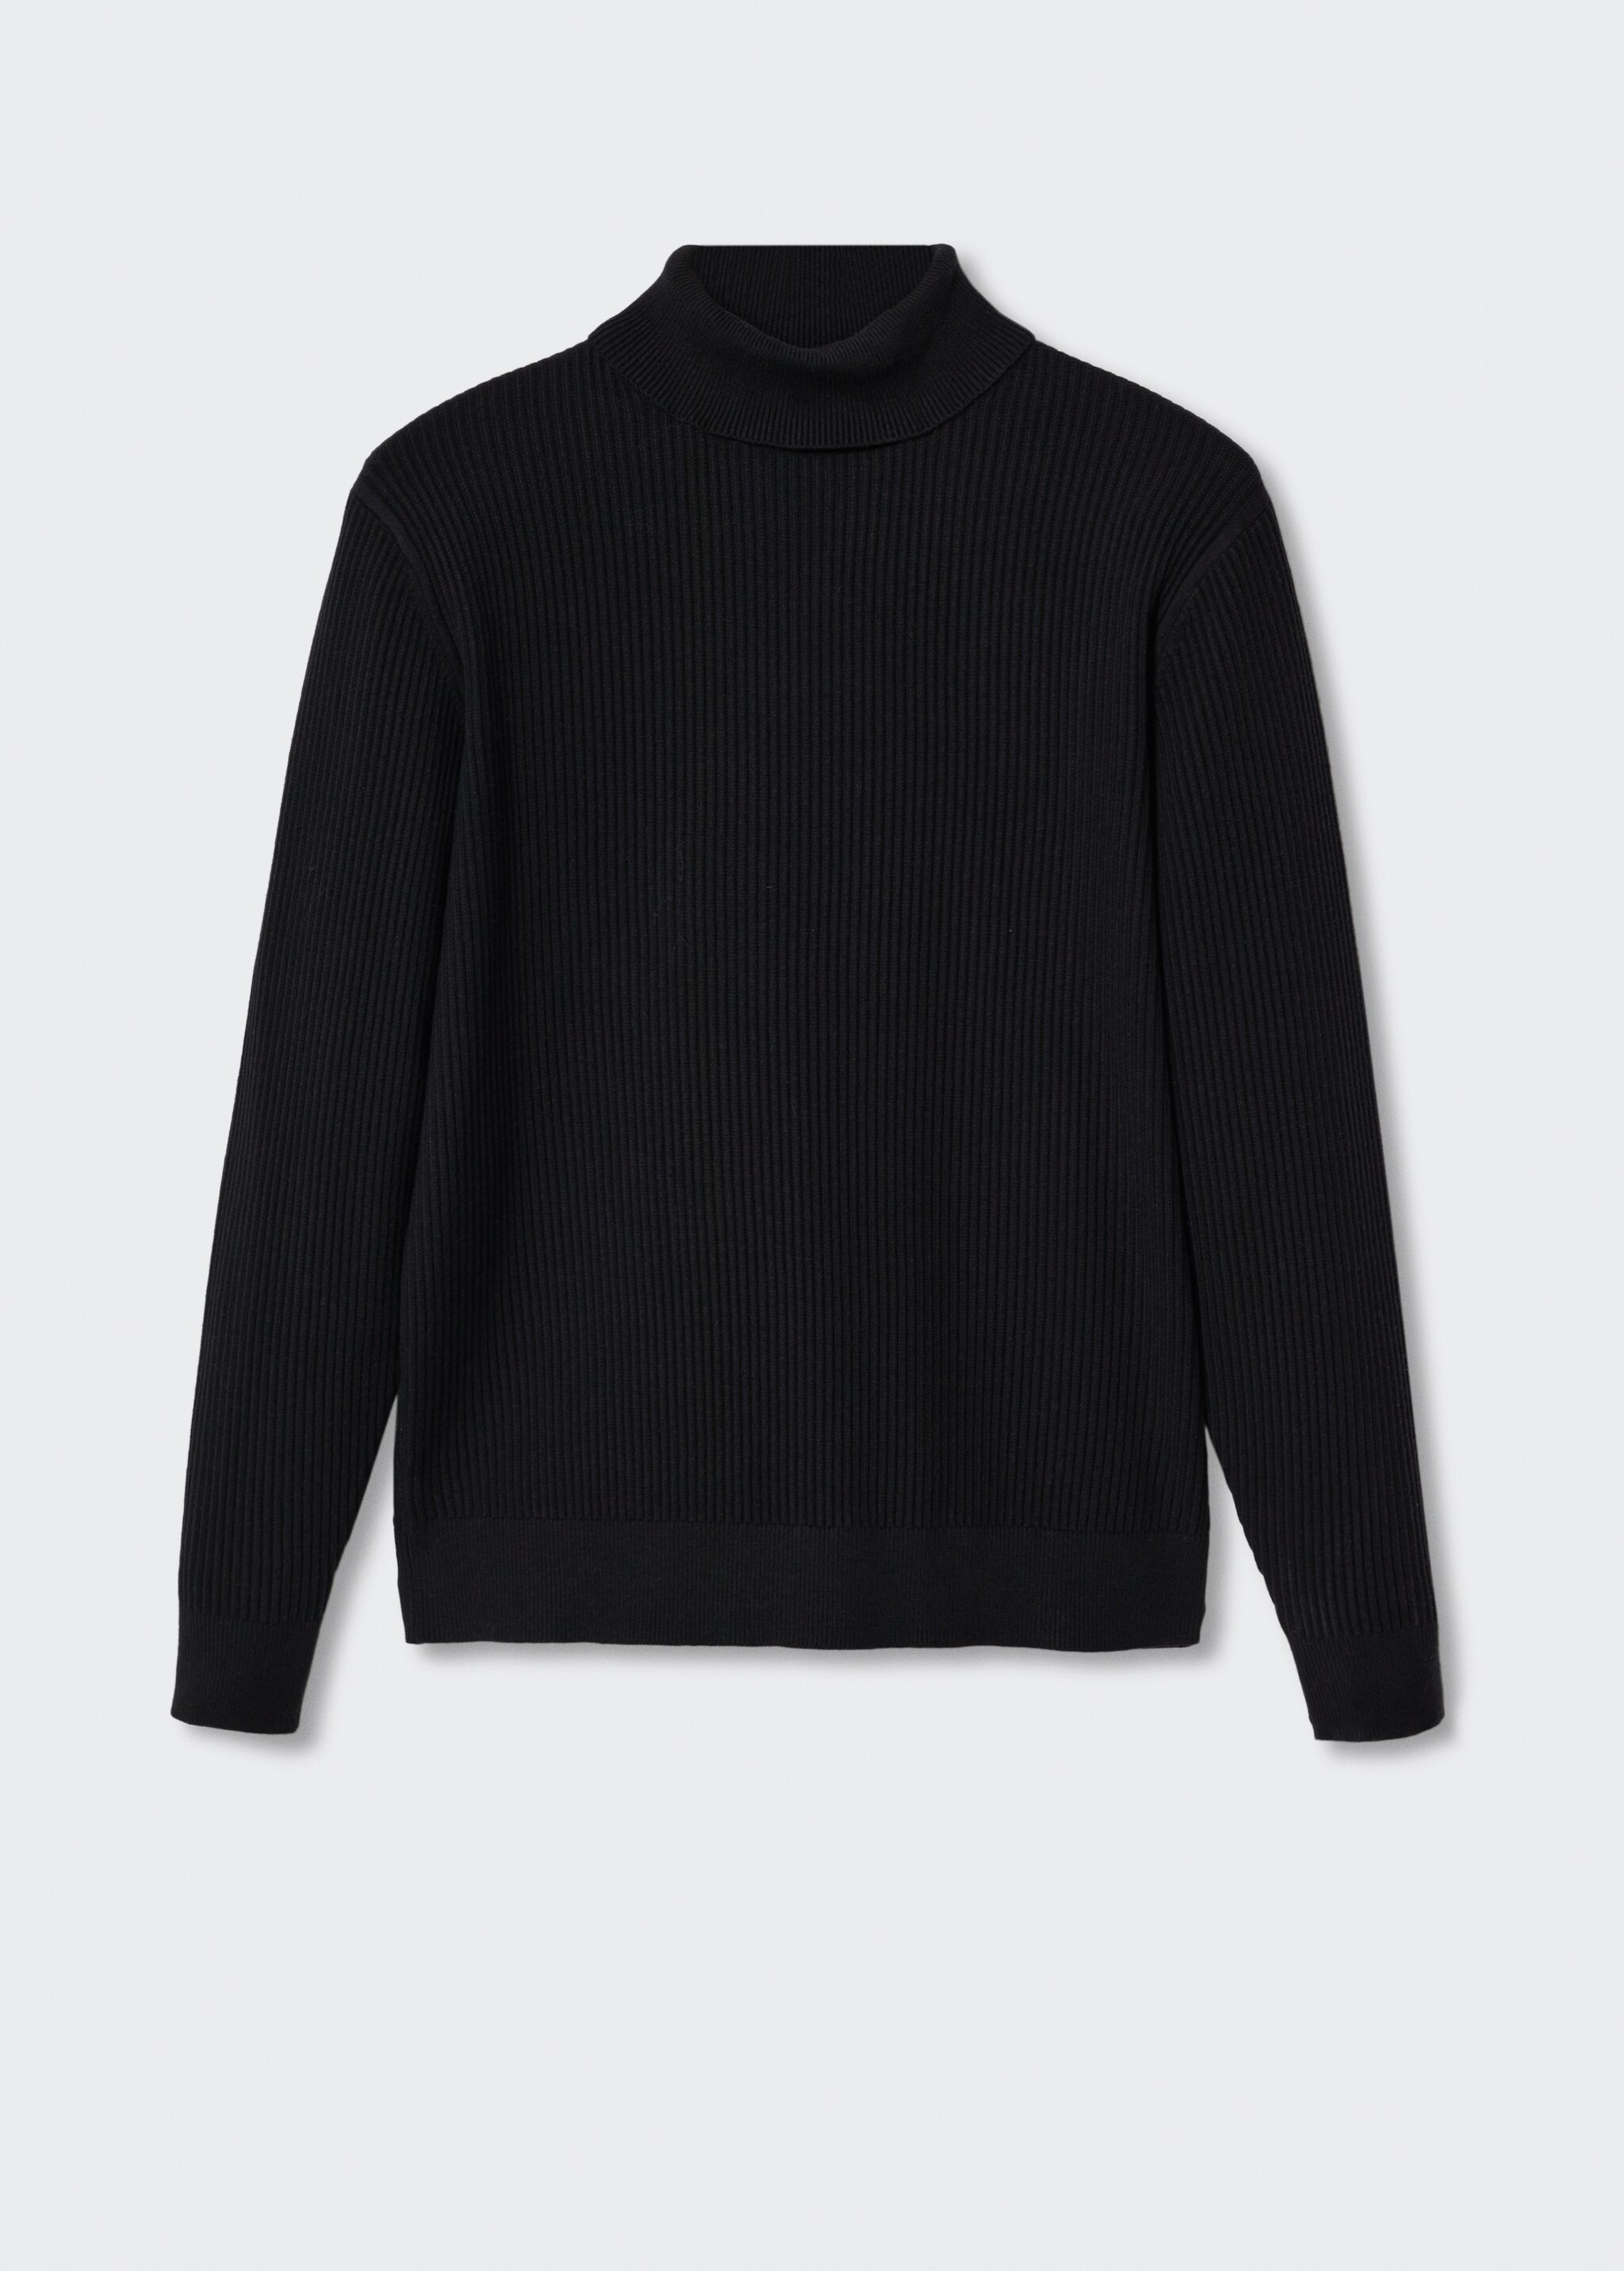 Structured turtleneck sweater - Article without model